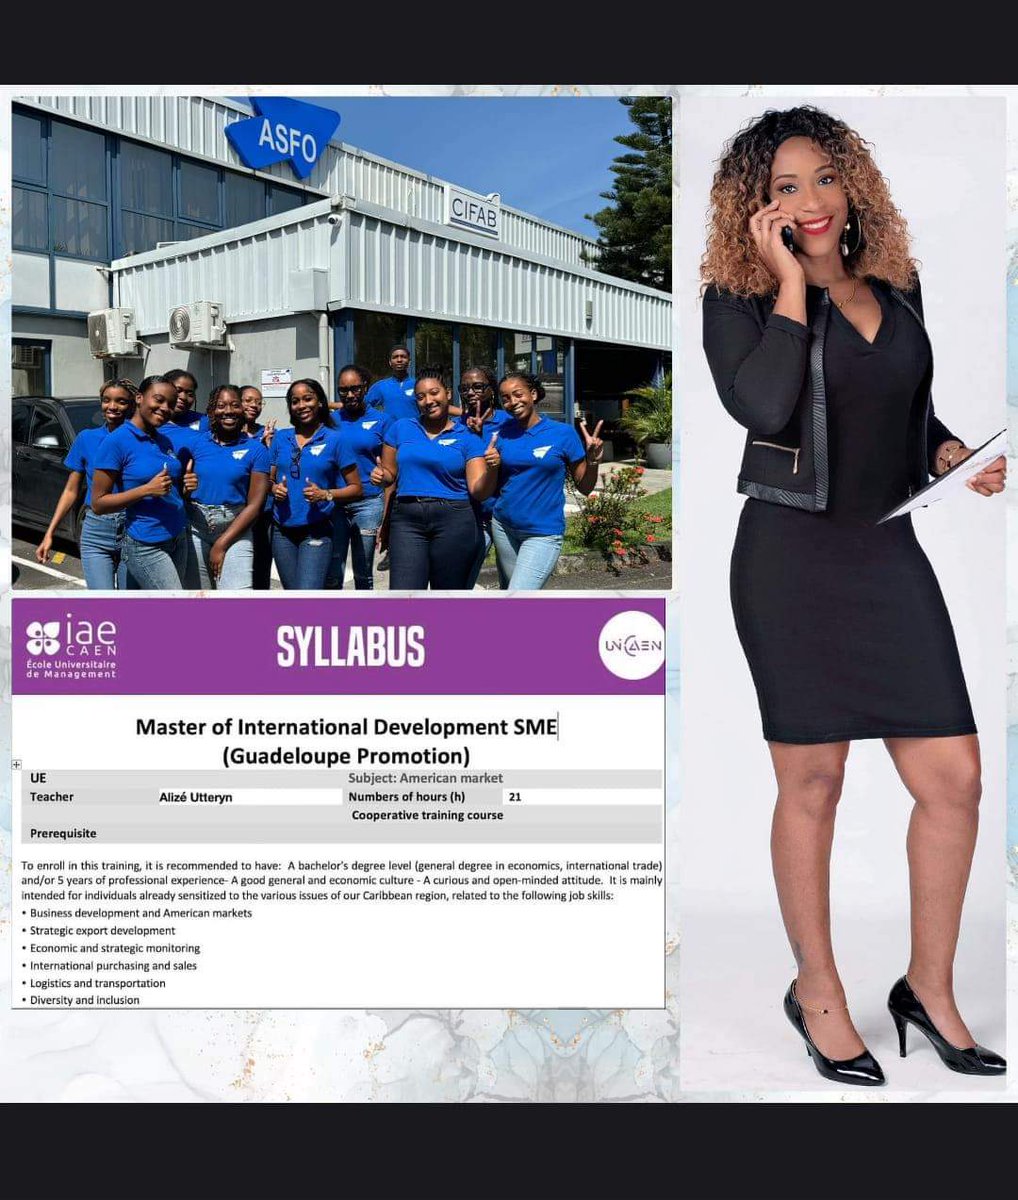 Congratulations to our CEO @alizeutteryn for being a teacher for the @Asfo students in the second year of the Master 's program SME in international development in Guadeloupe. #education #leadership #mentorship #youngpeople